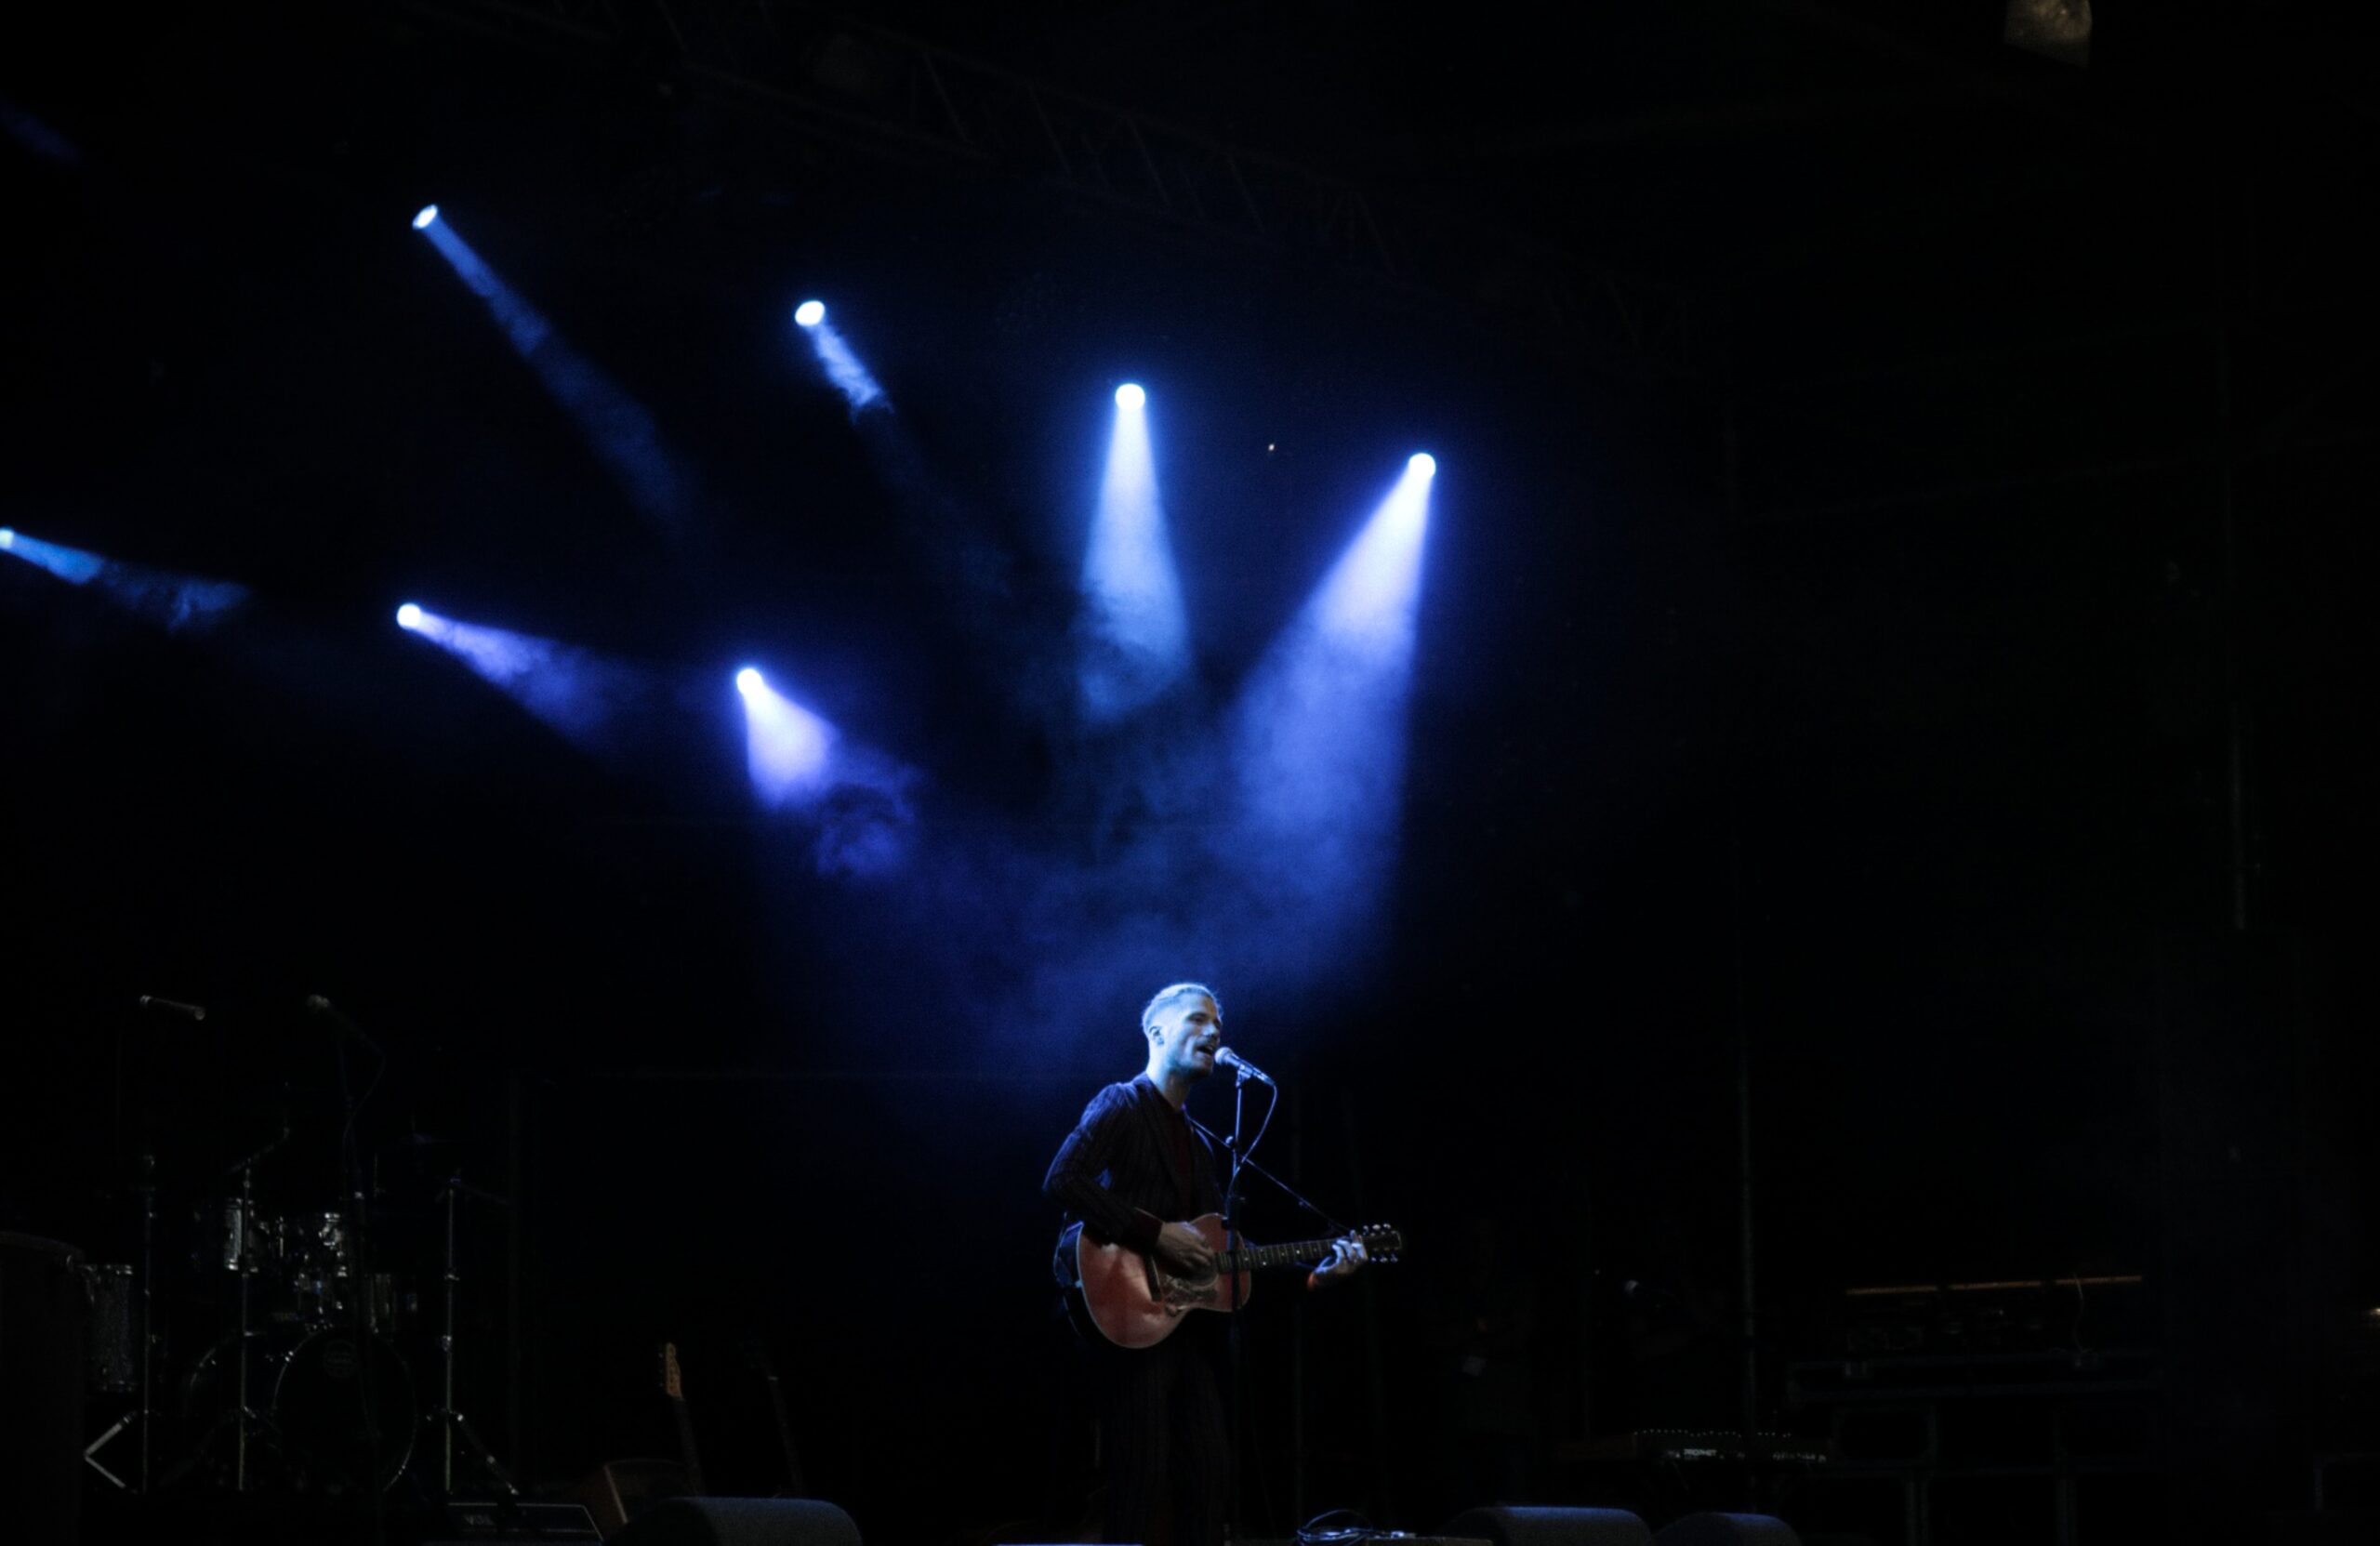 A person singing on stage with his guitar